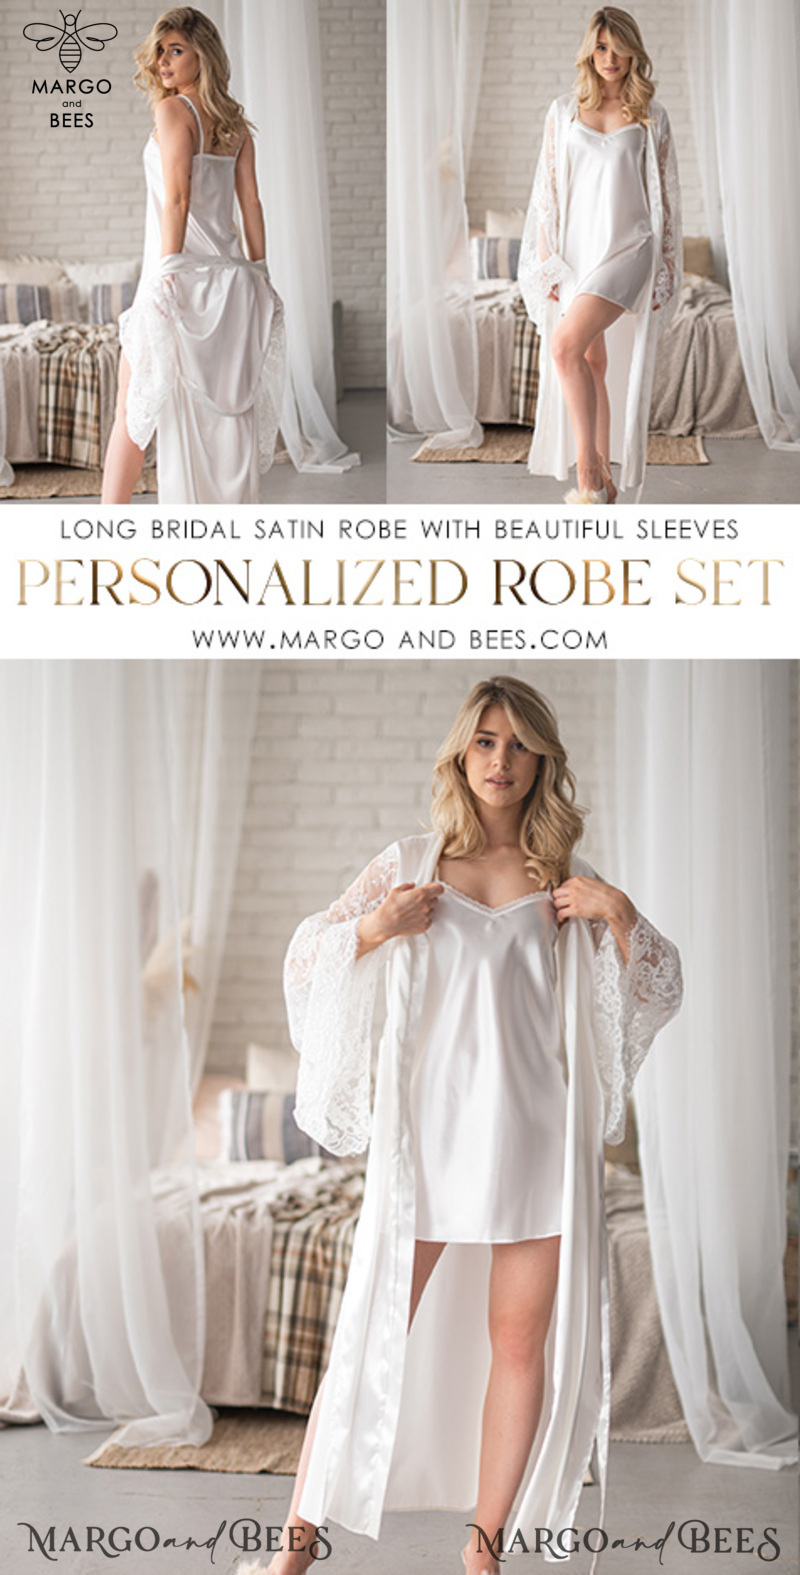 Personalised Satin Robes, Luxury Bride Dressing Gowns, Sexy Lace sleeves Wedding Robes, Get Ready Bridal Robes with name on it, Hen Party Lace Silk Robes -1